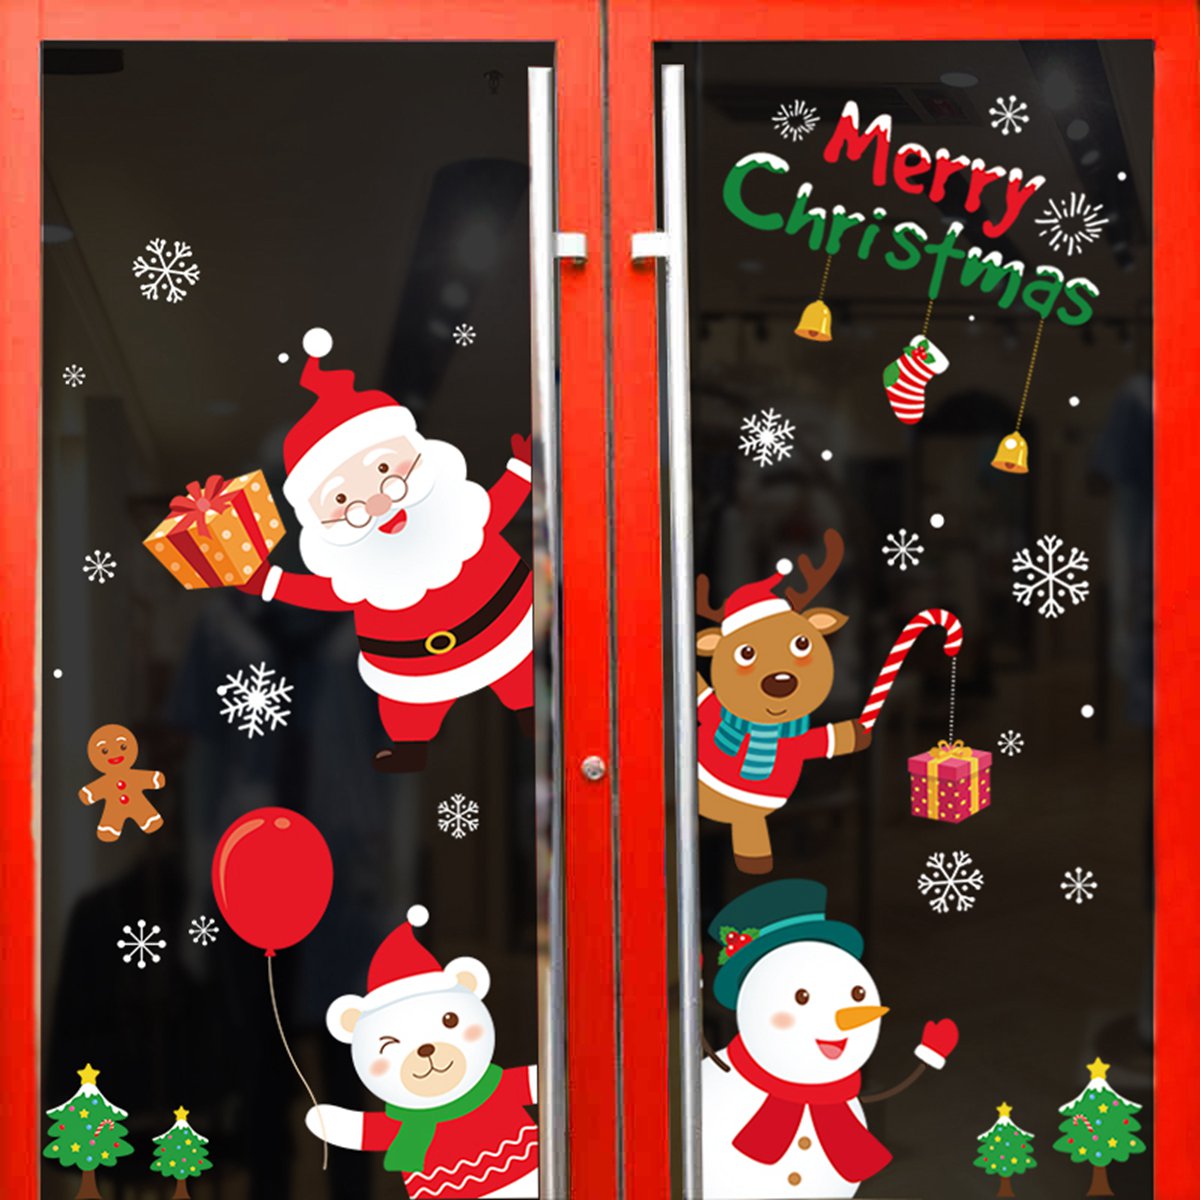 Christmas-Window-Stickers-Christmas-Wall-Sticker-Kids-Room-Wall-Decals-Merry-Christmas-Decorations-For-Home-New